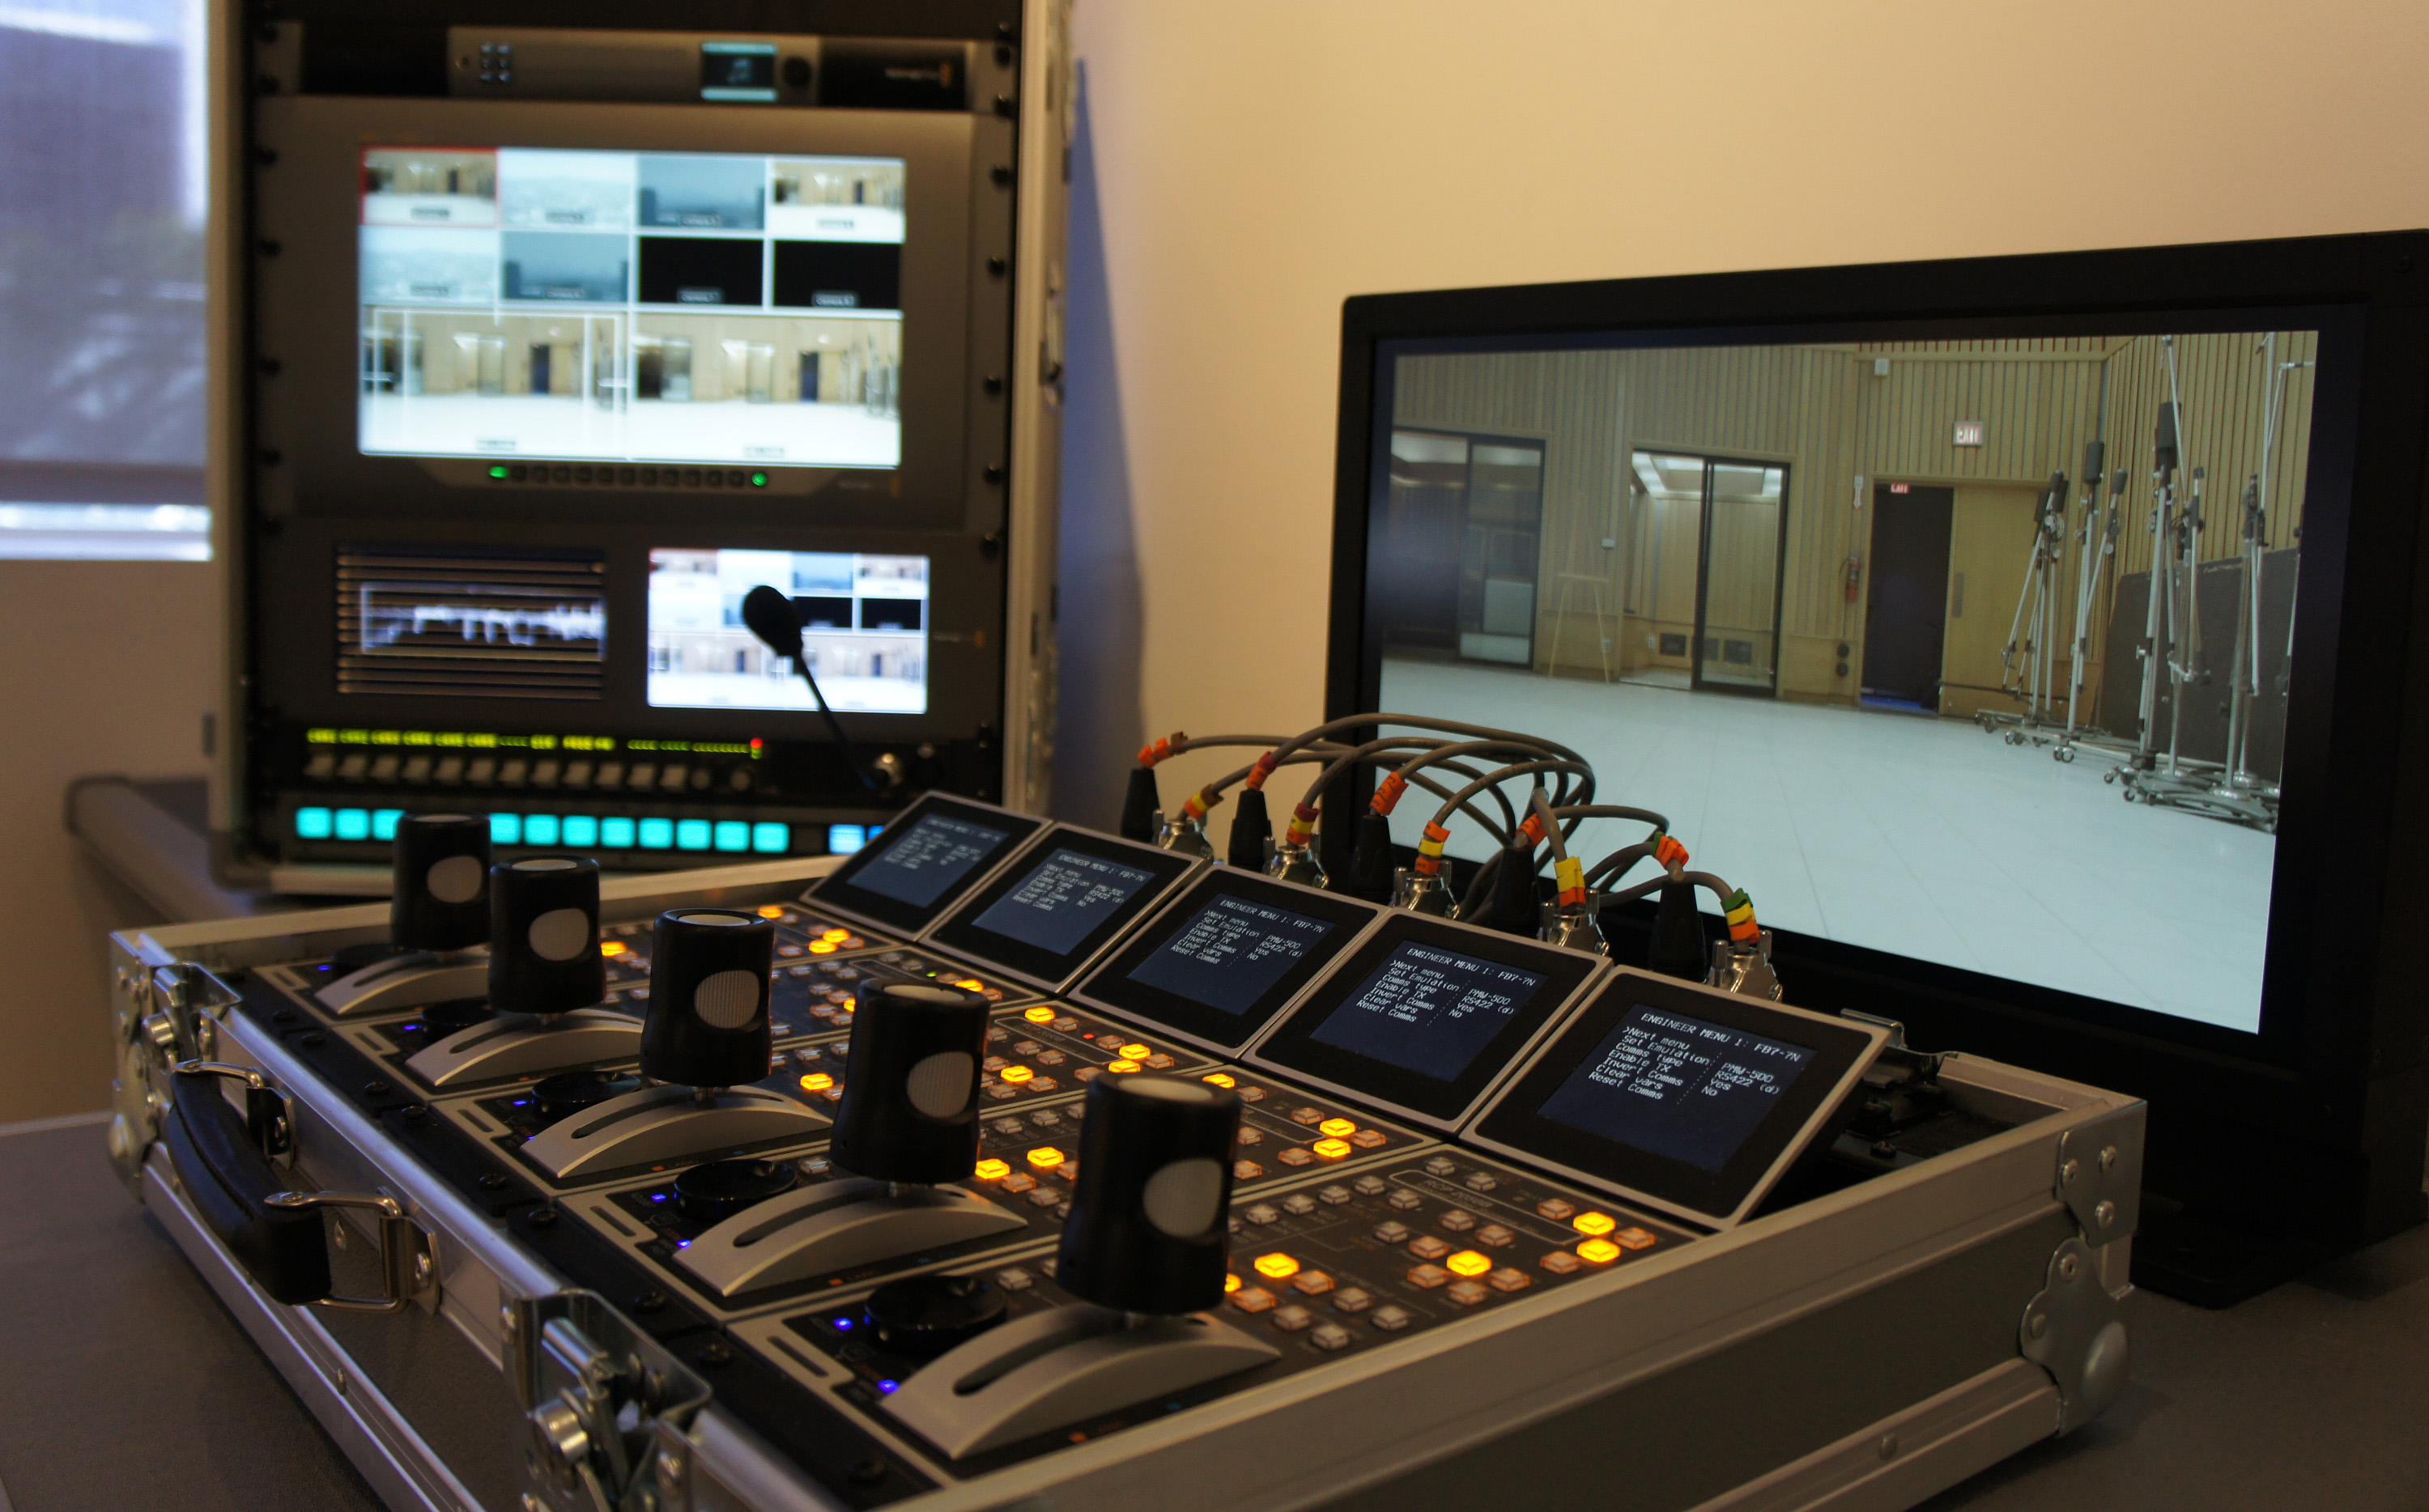 Part of the multi-camera UHD flyway system designed and produced by ATG Danmon for United Music Group